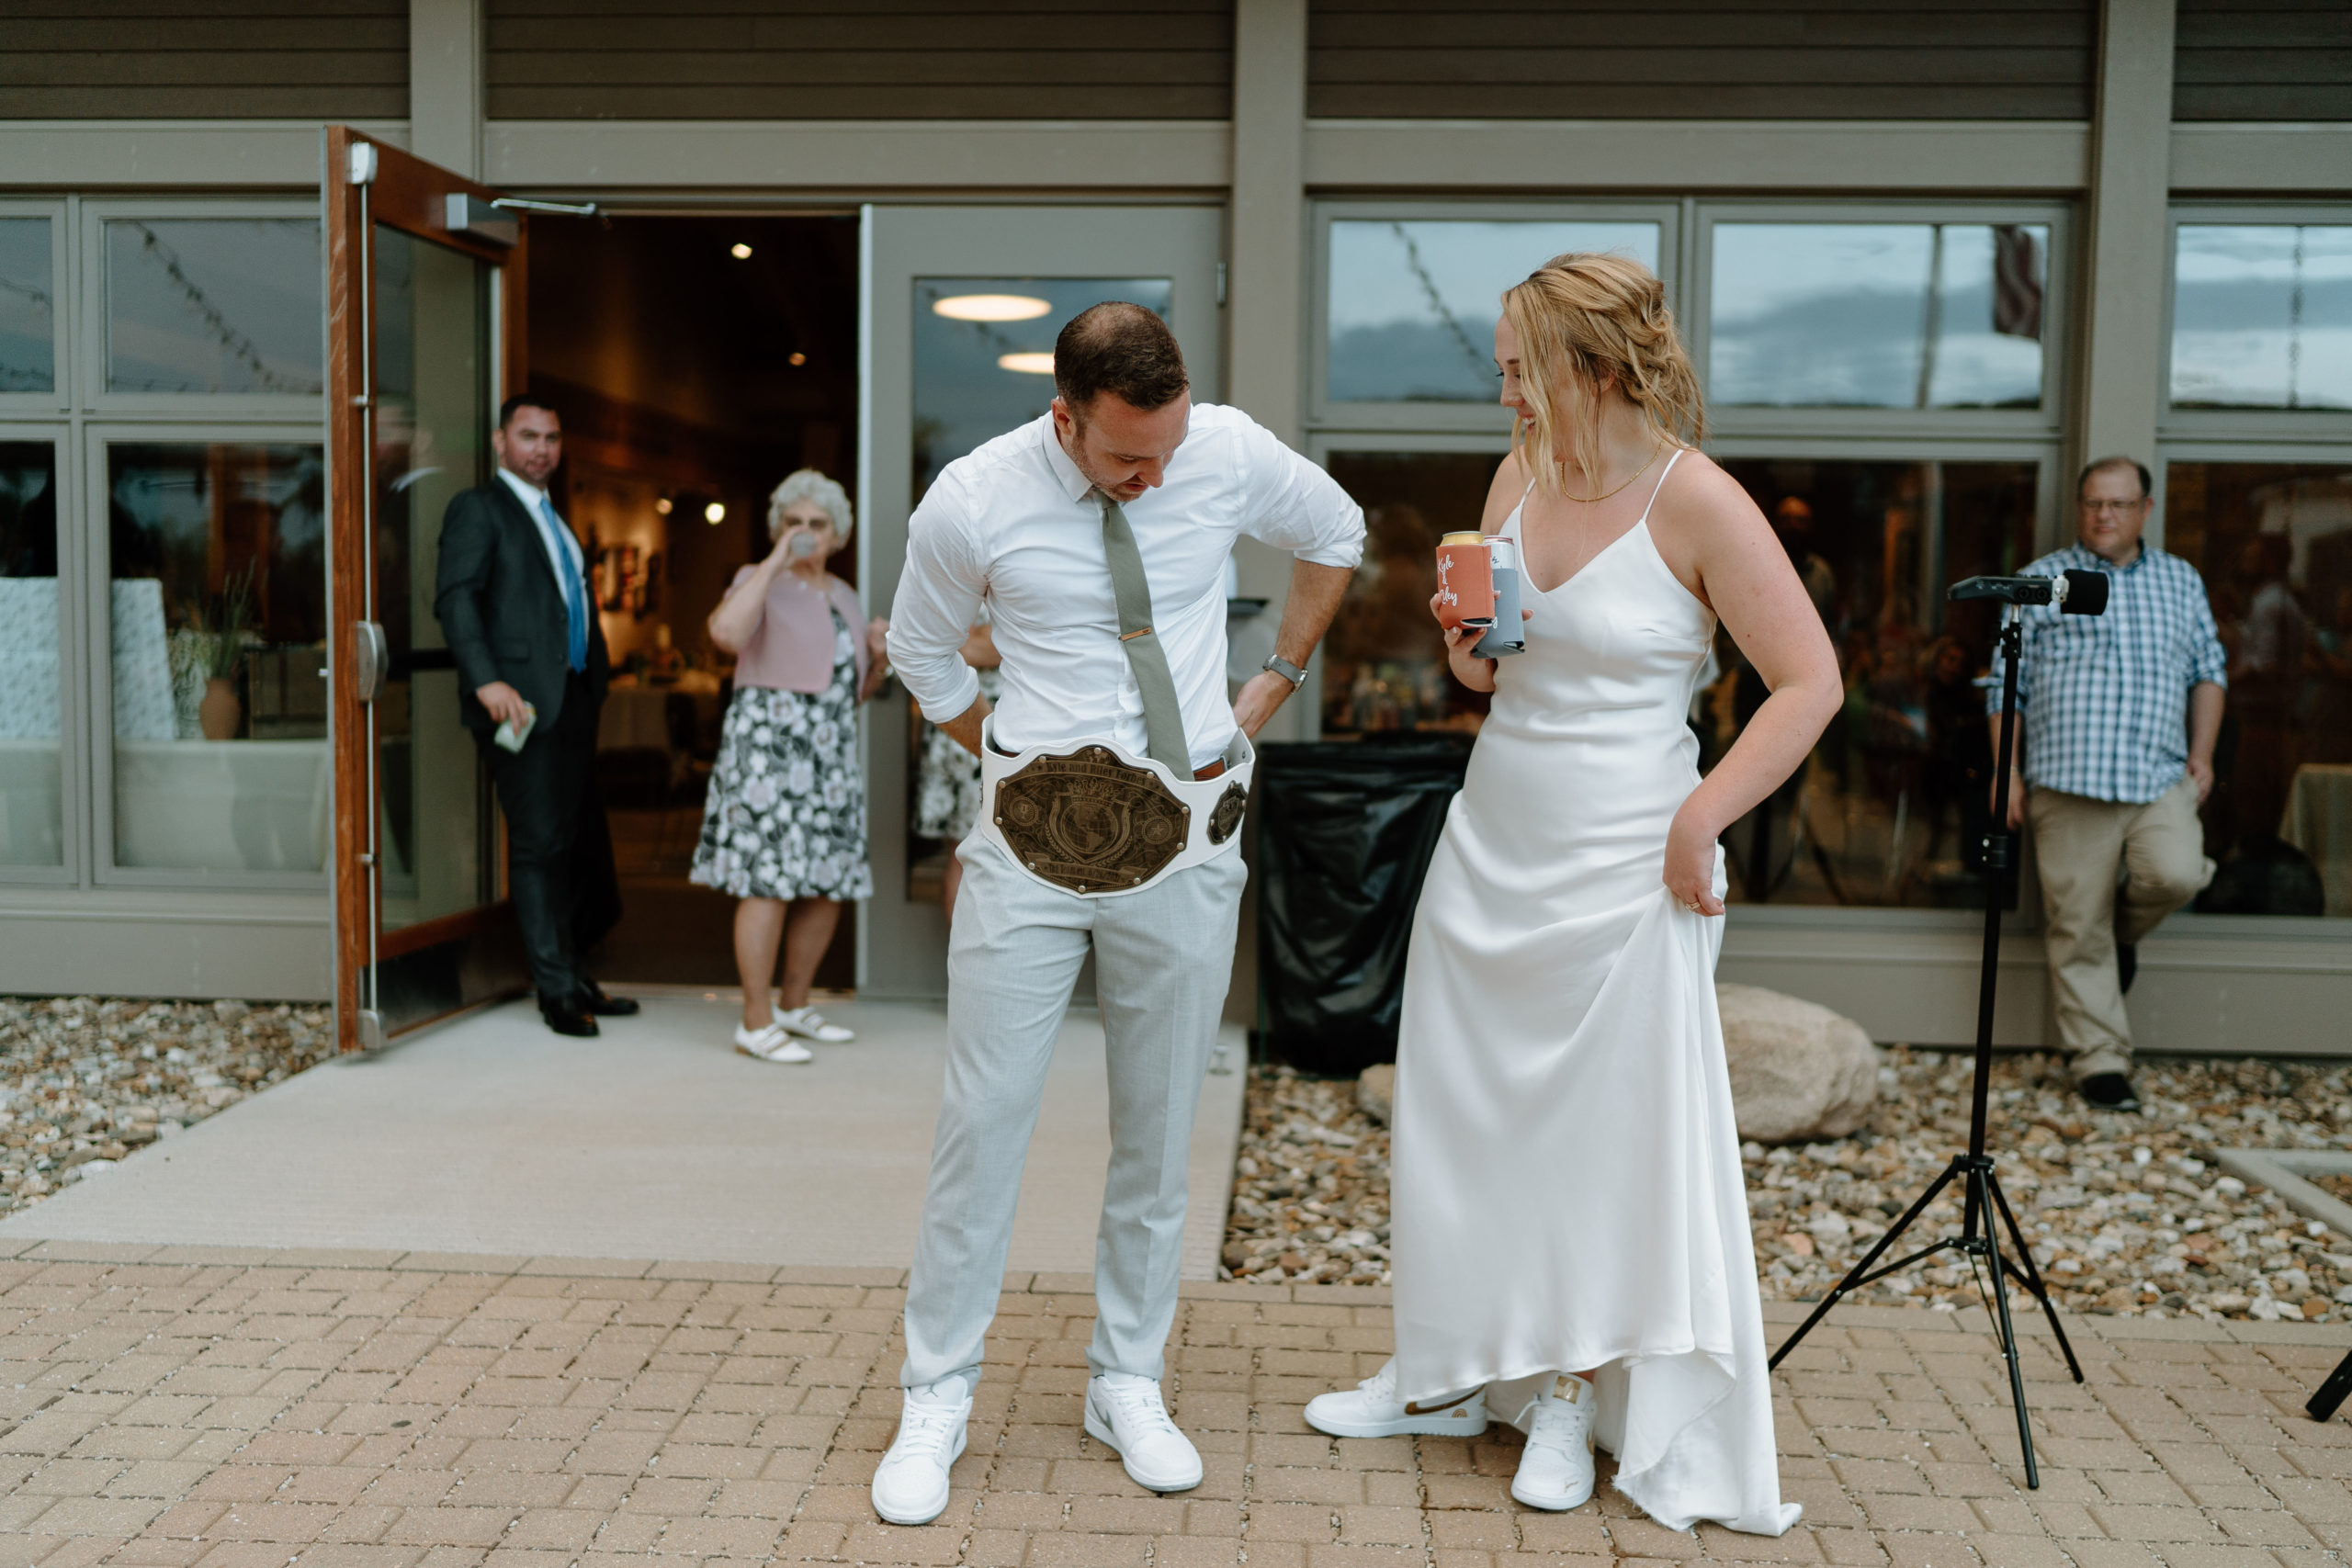 This is a bride and groom celebrating at their reception at Indian Creek Nature Center in Cedar Rapids, IA